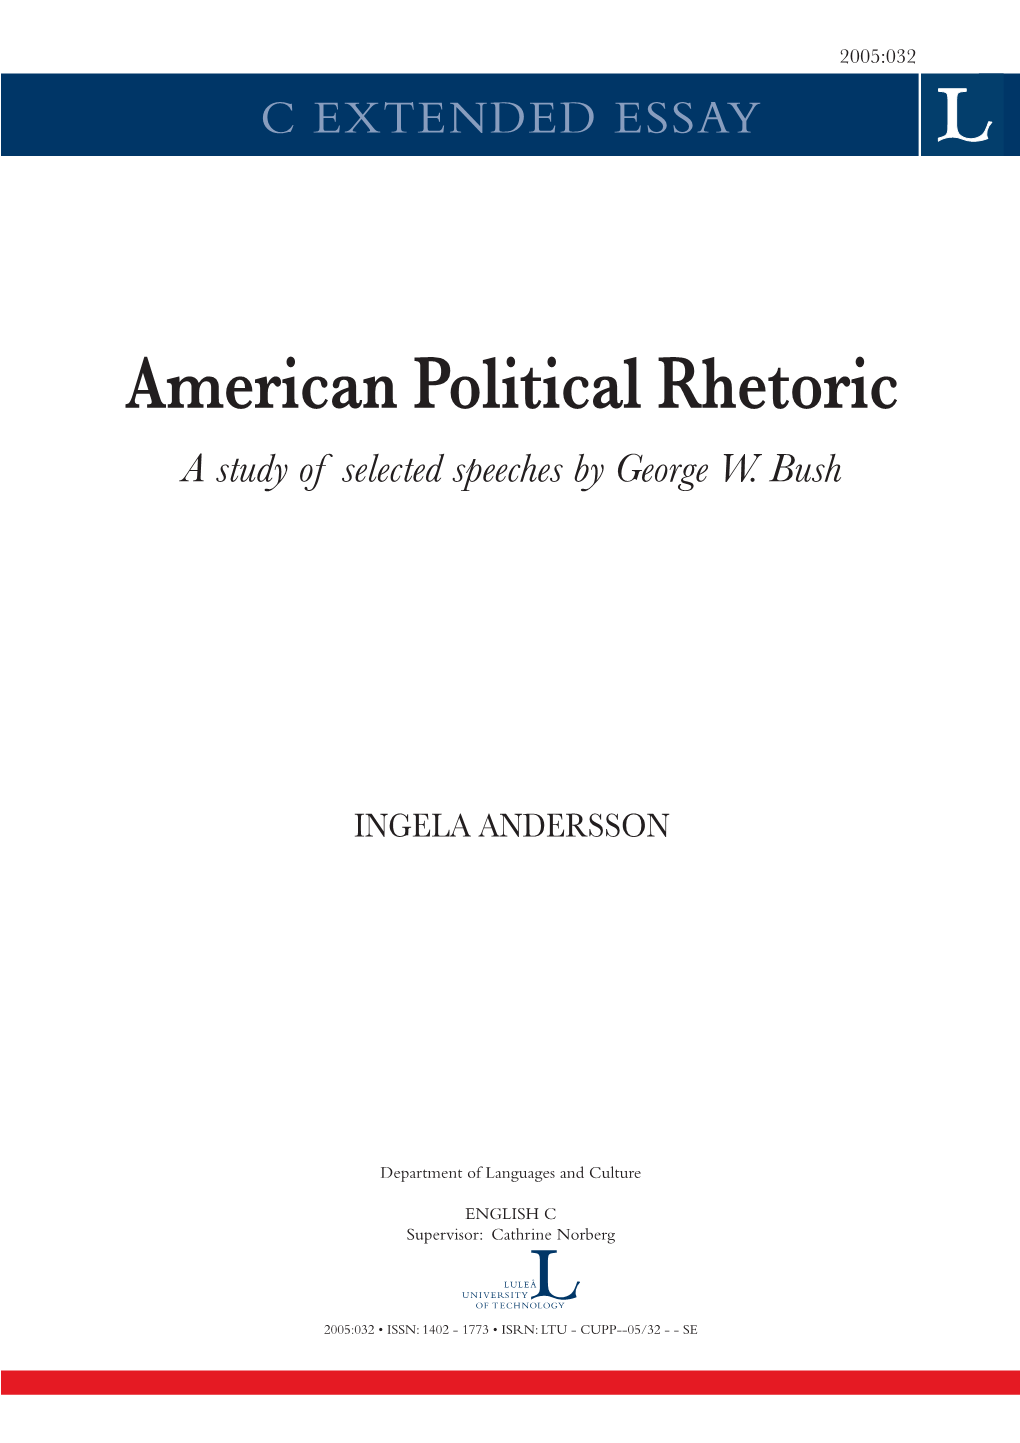 American Political Rhetoric: a Study of Selected Speeches by George W. Bush